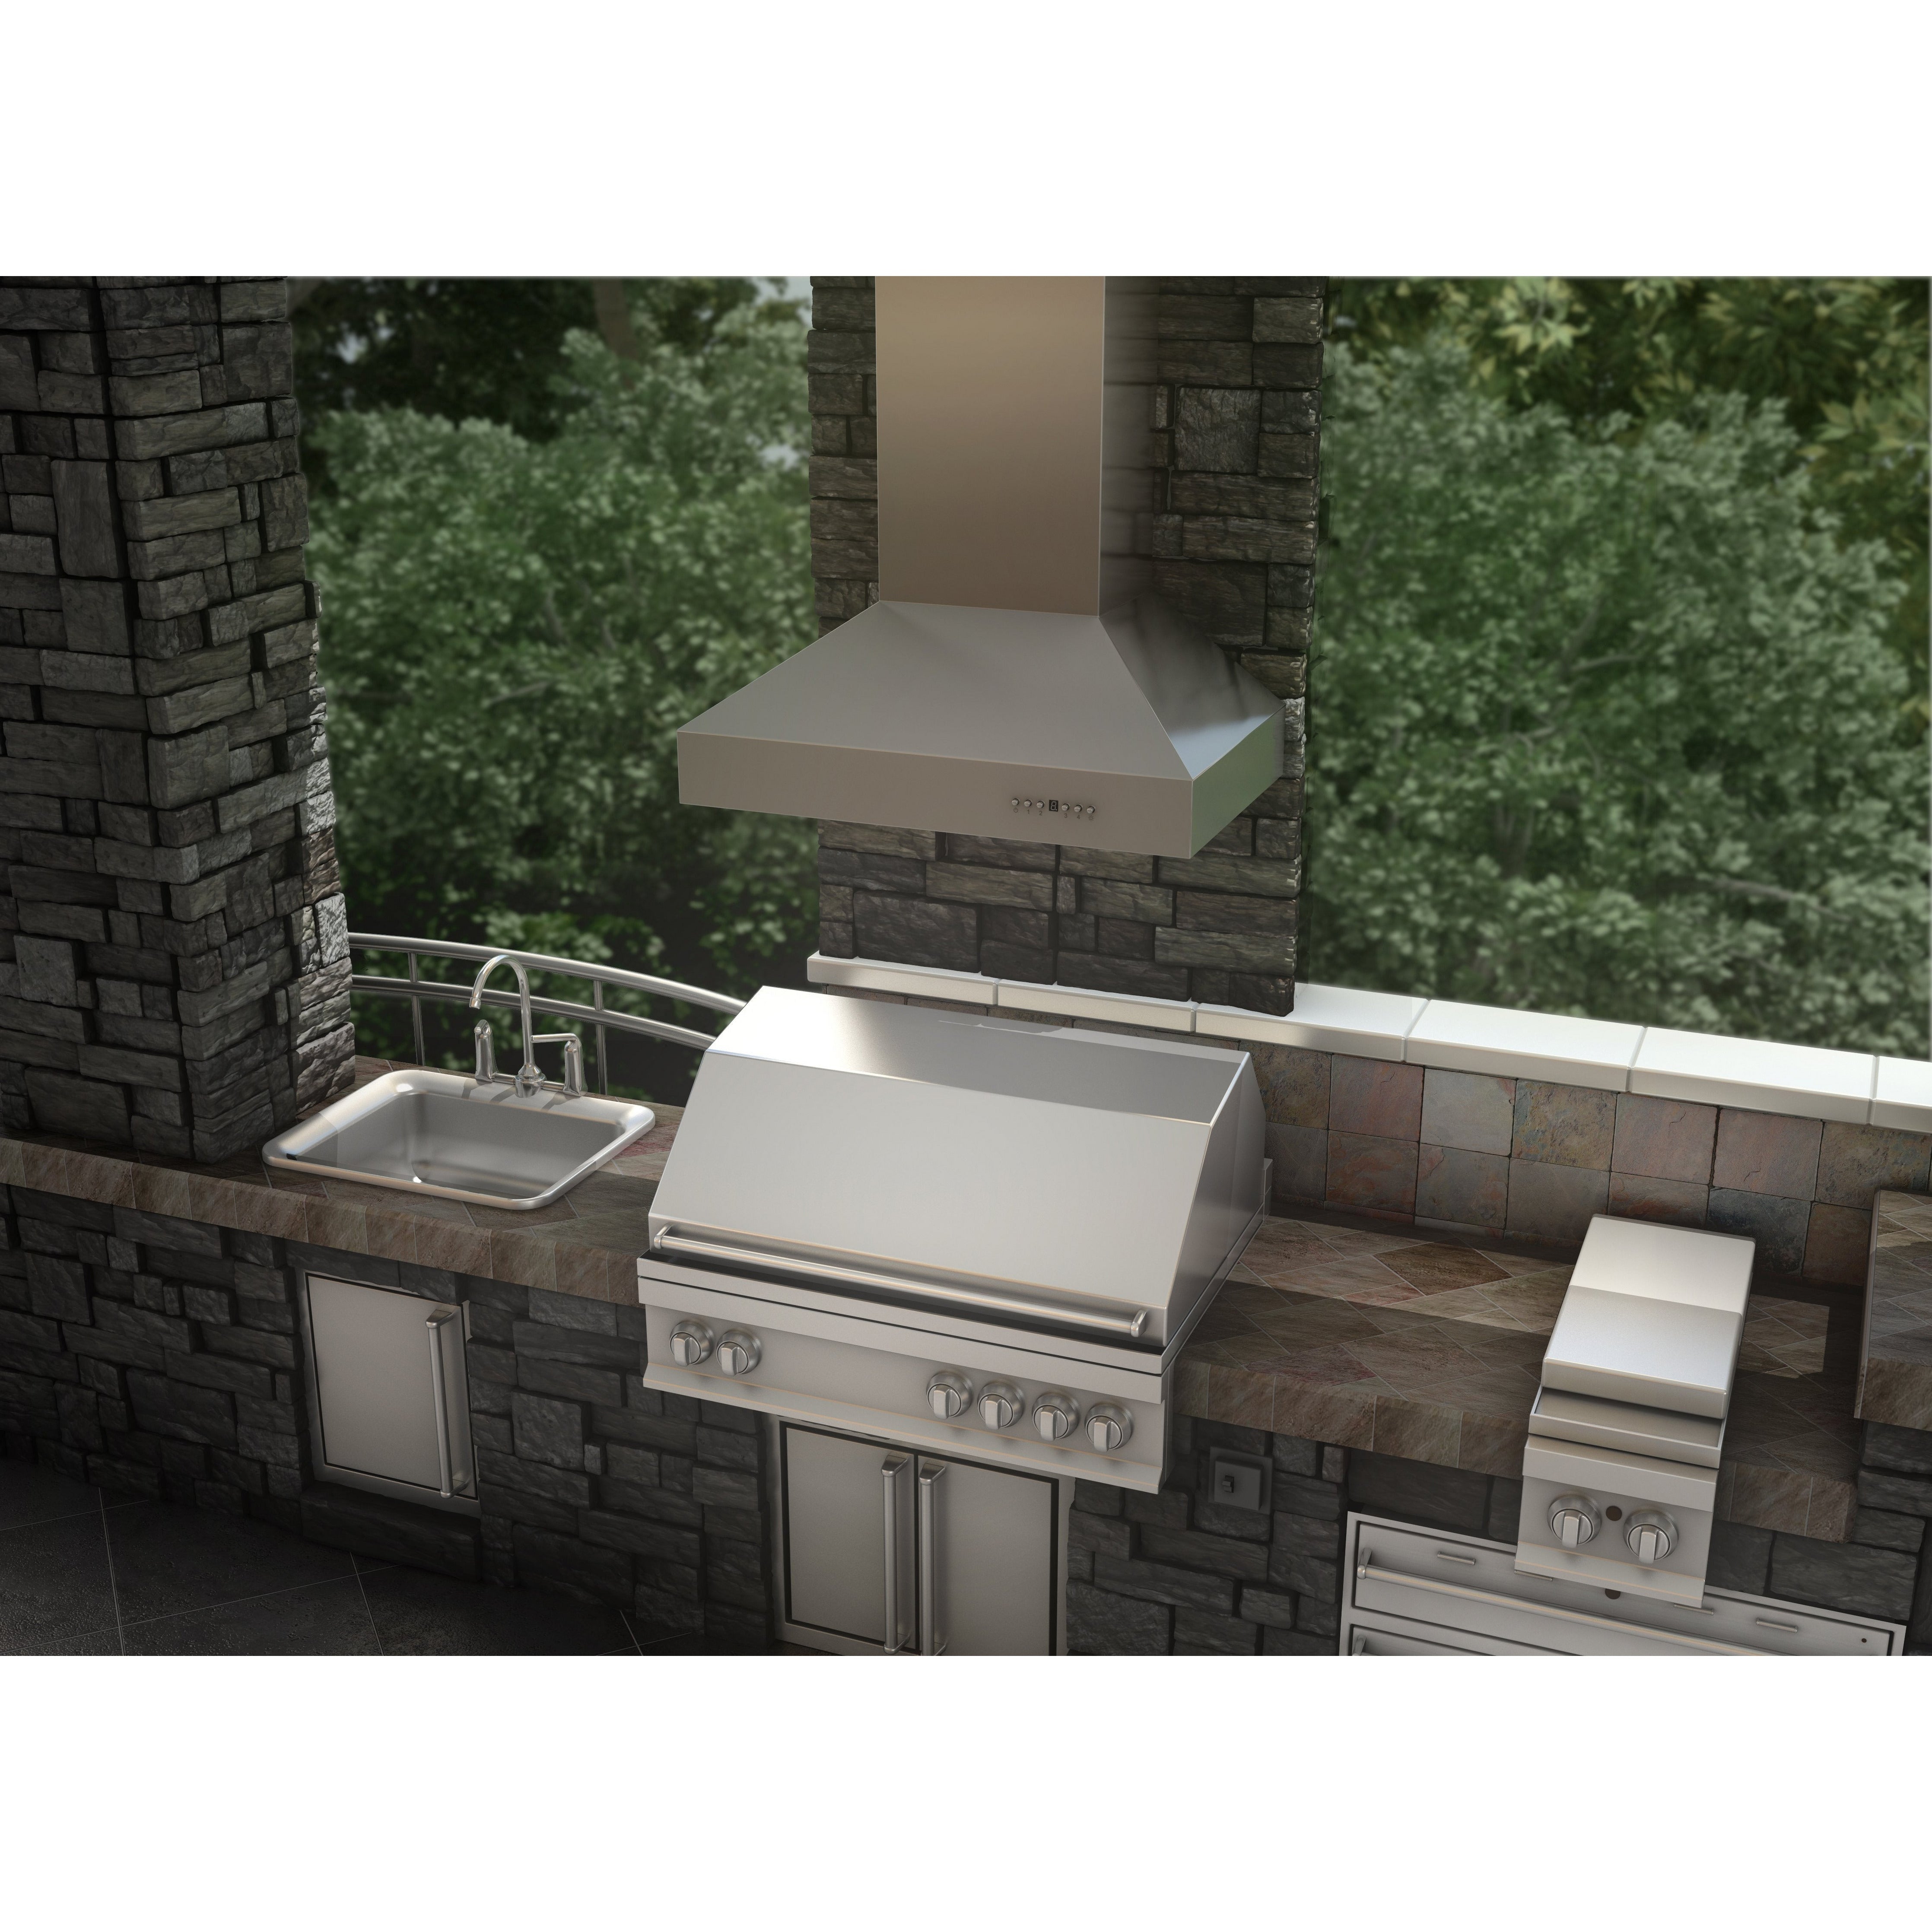 ZLINE Ducted Wall Mount Range Hood in Outdoor Approved Stainless Steel (697-304) - New Star Living